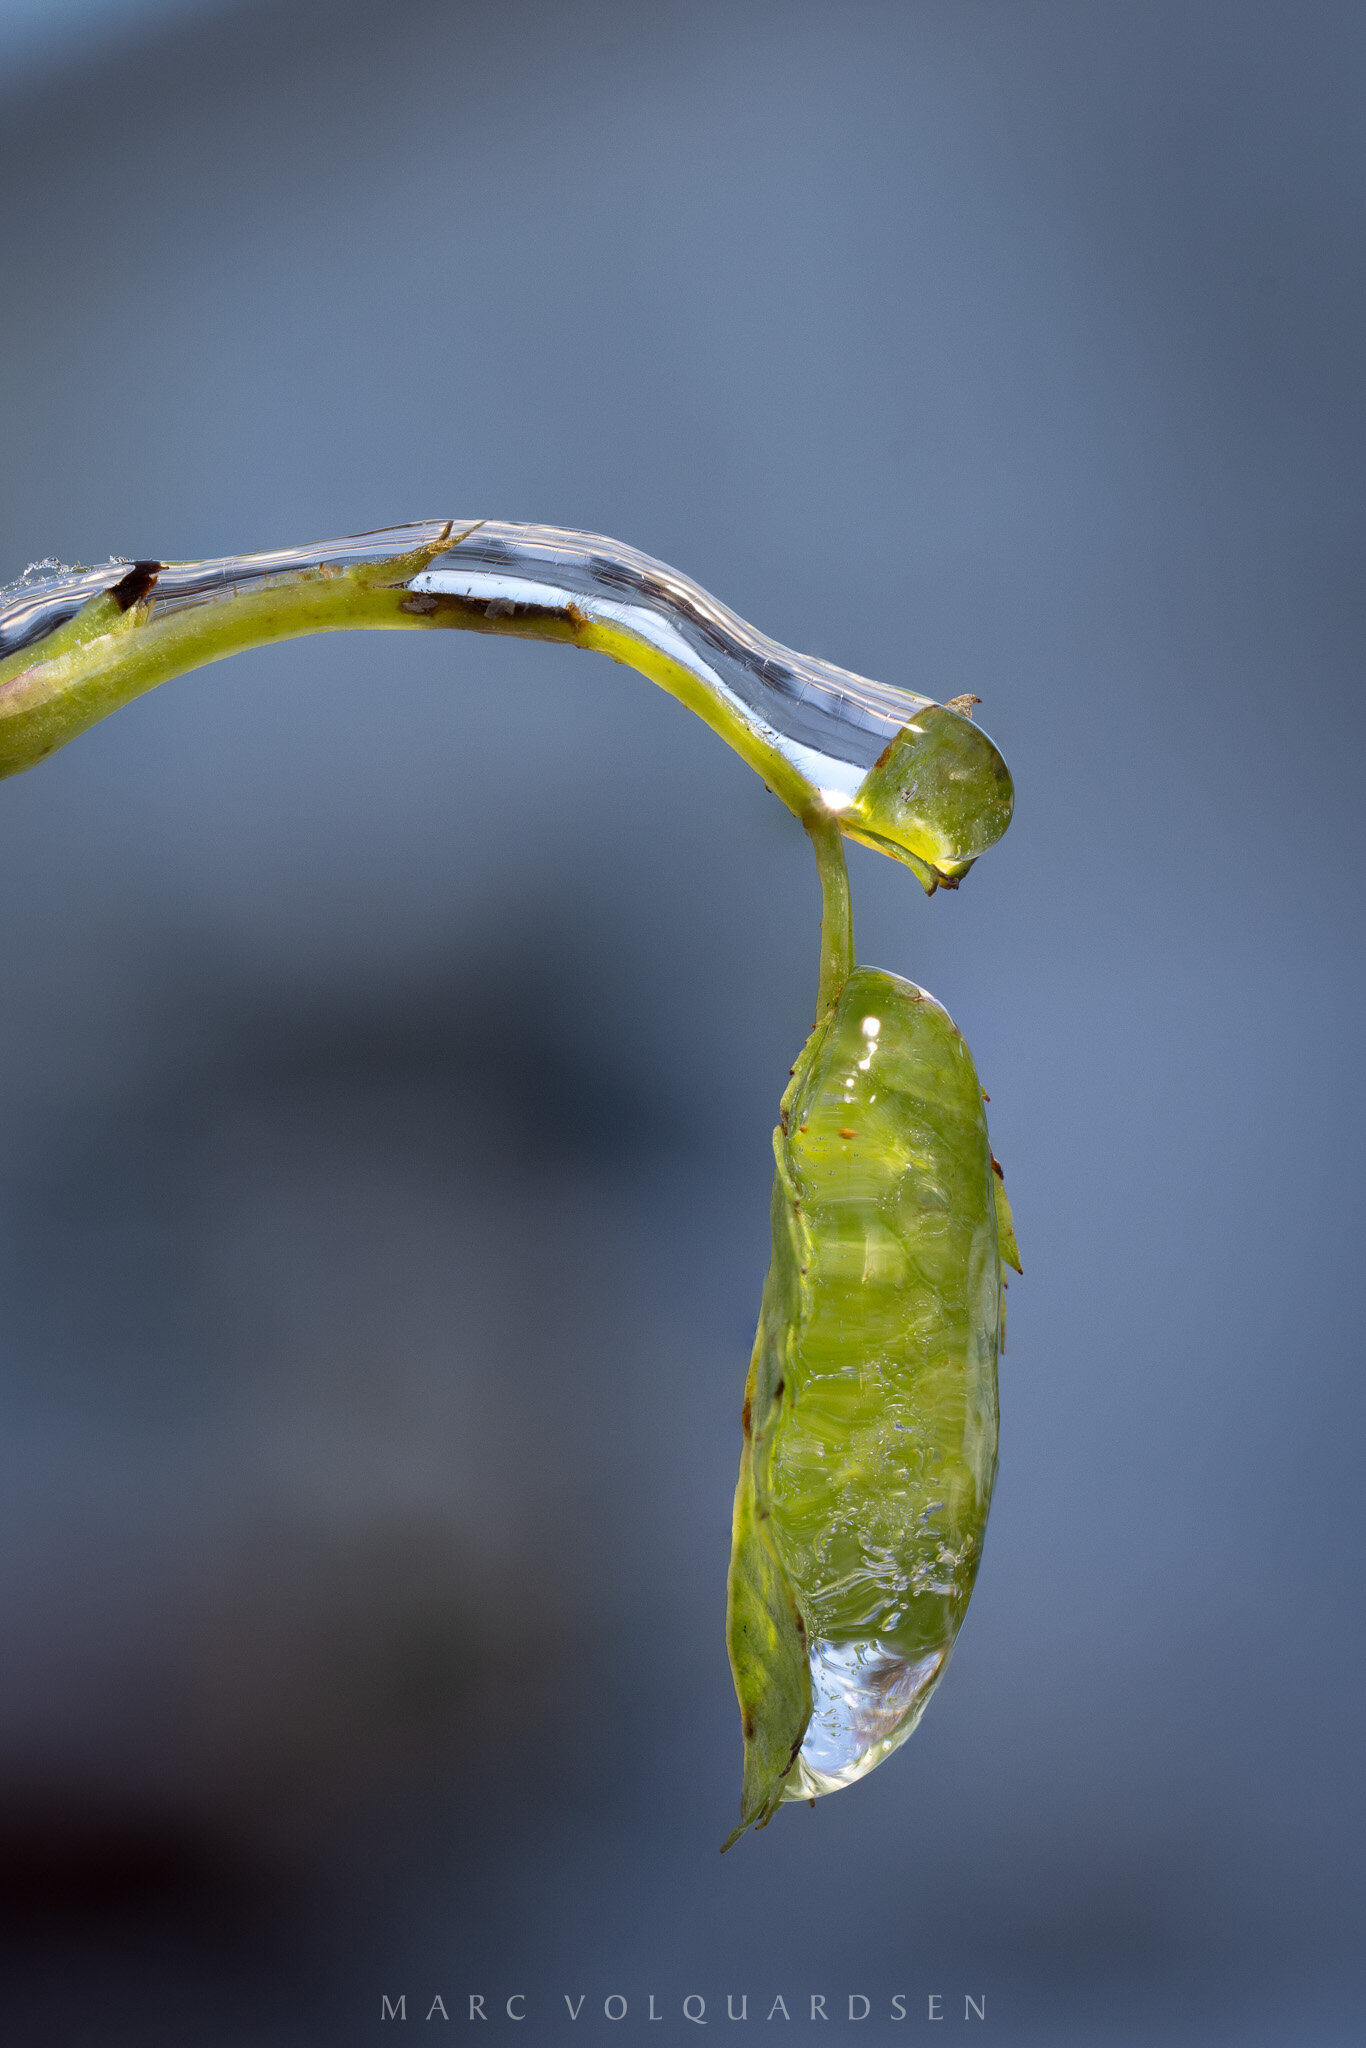 Iced branch with leaf